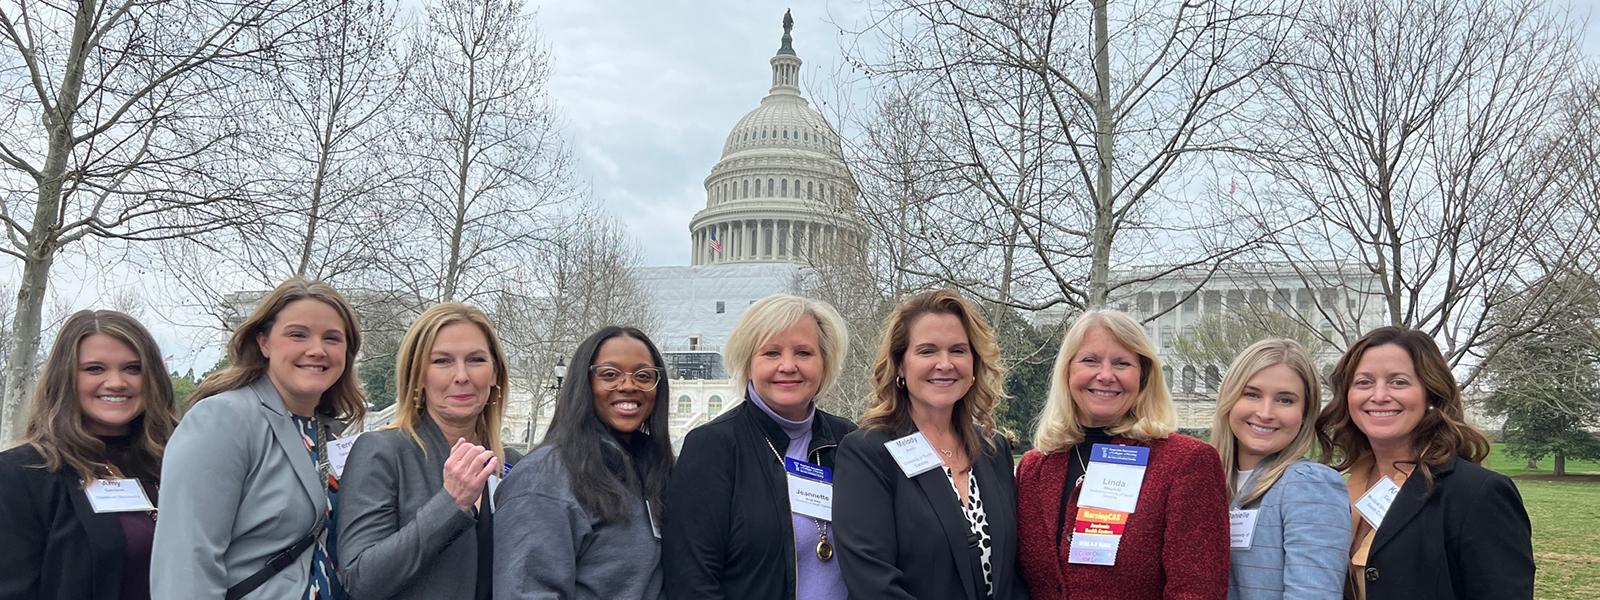 CIU Dean of Nursing Programs, Dr. Jill McElheny, is joined by fellow college nursing deans and graduate students on Capitol Hill. (Photo provided) 